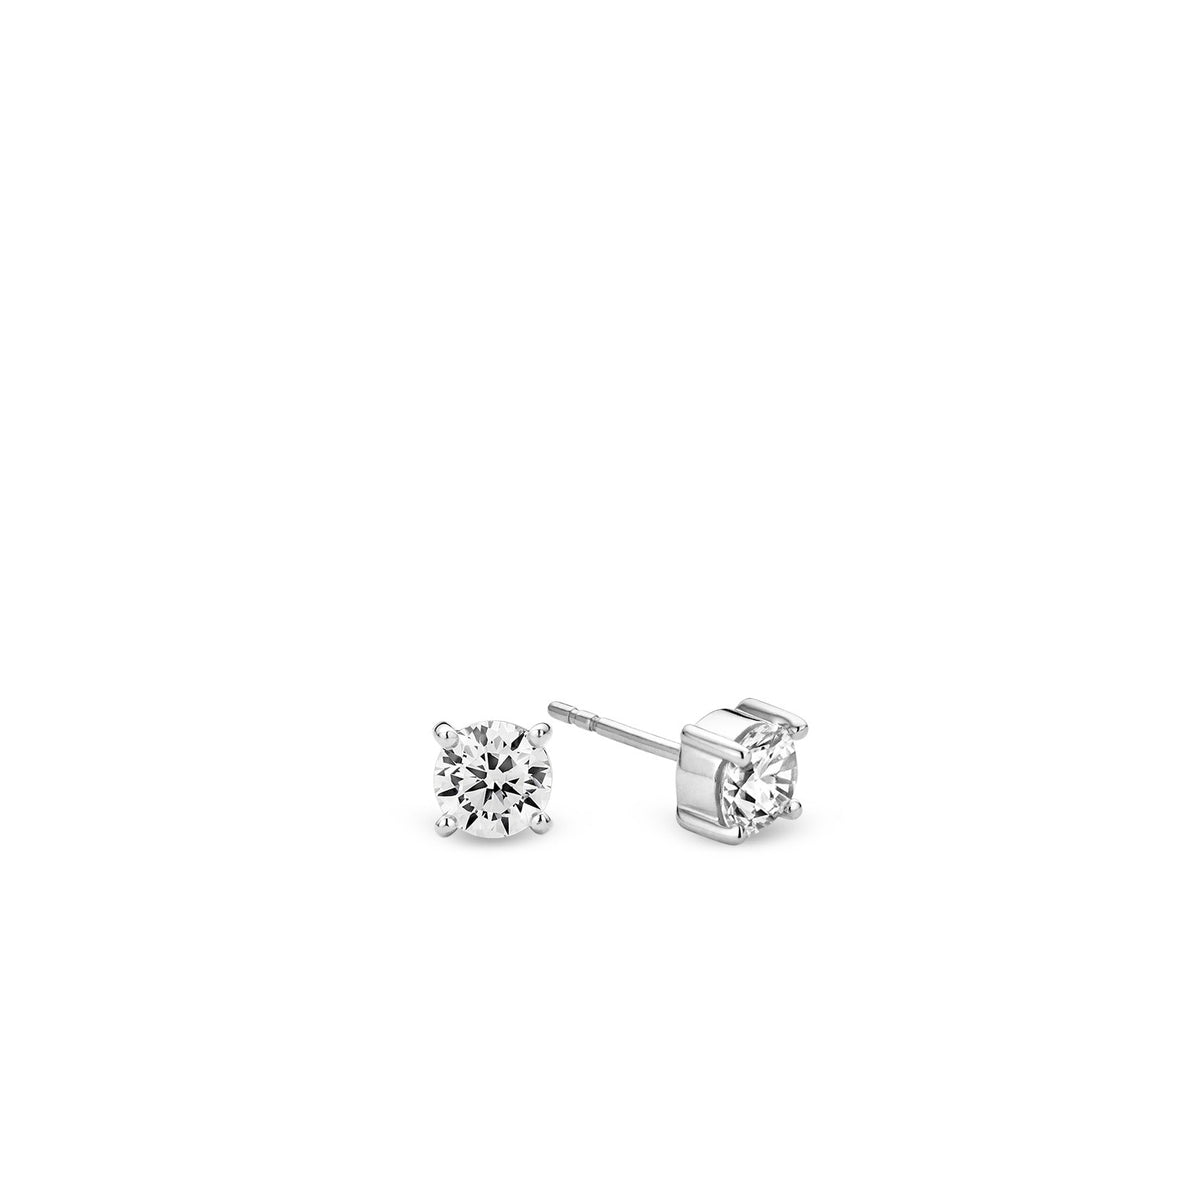 TI SENTO Sterling Silver Four Prong Set Cubic Zirconia Earrings